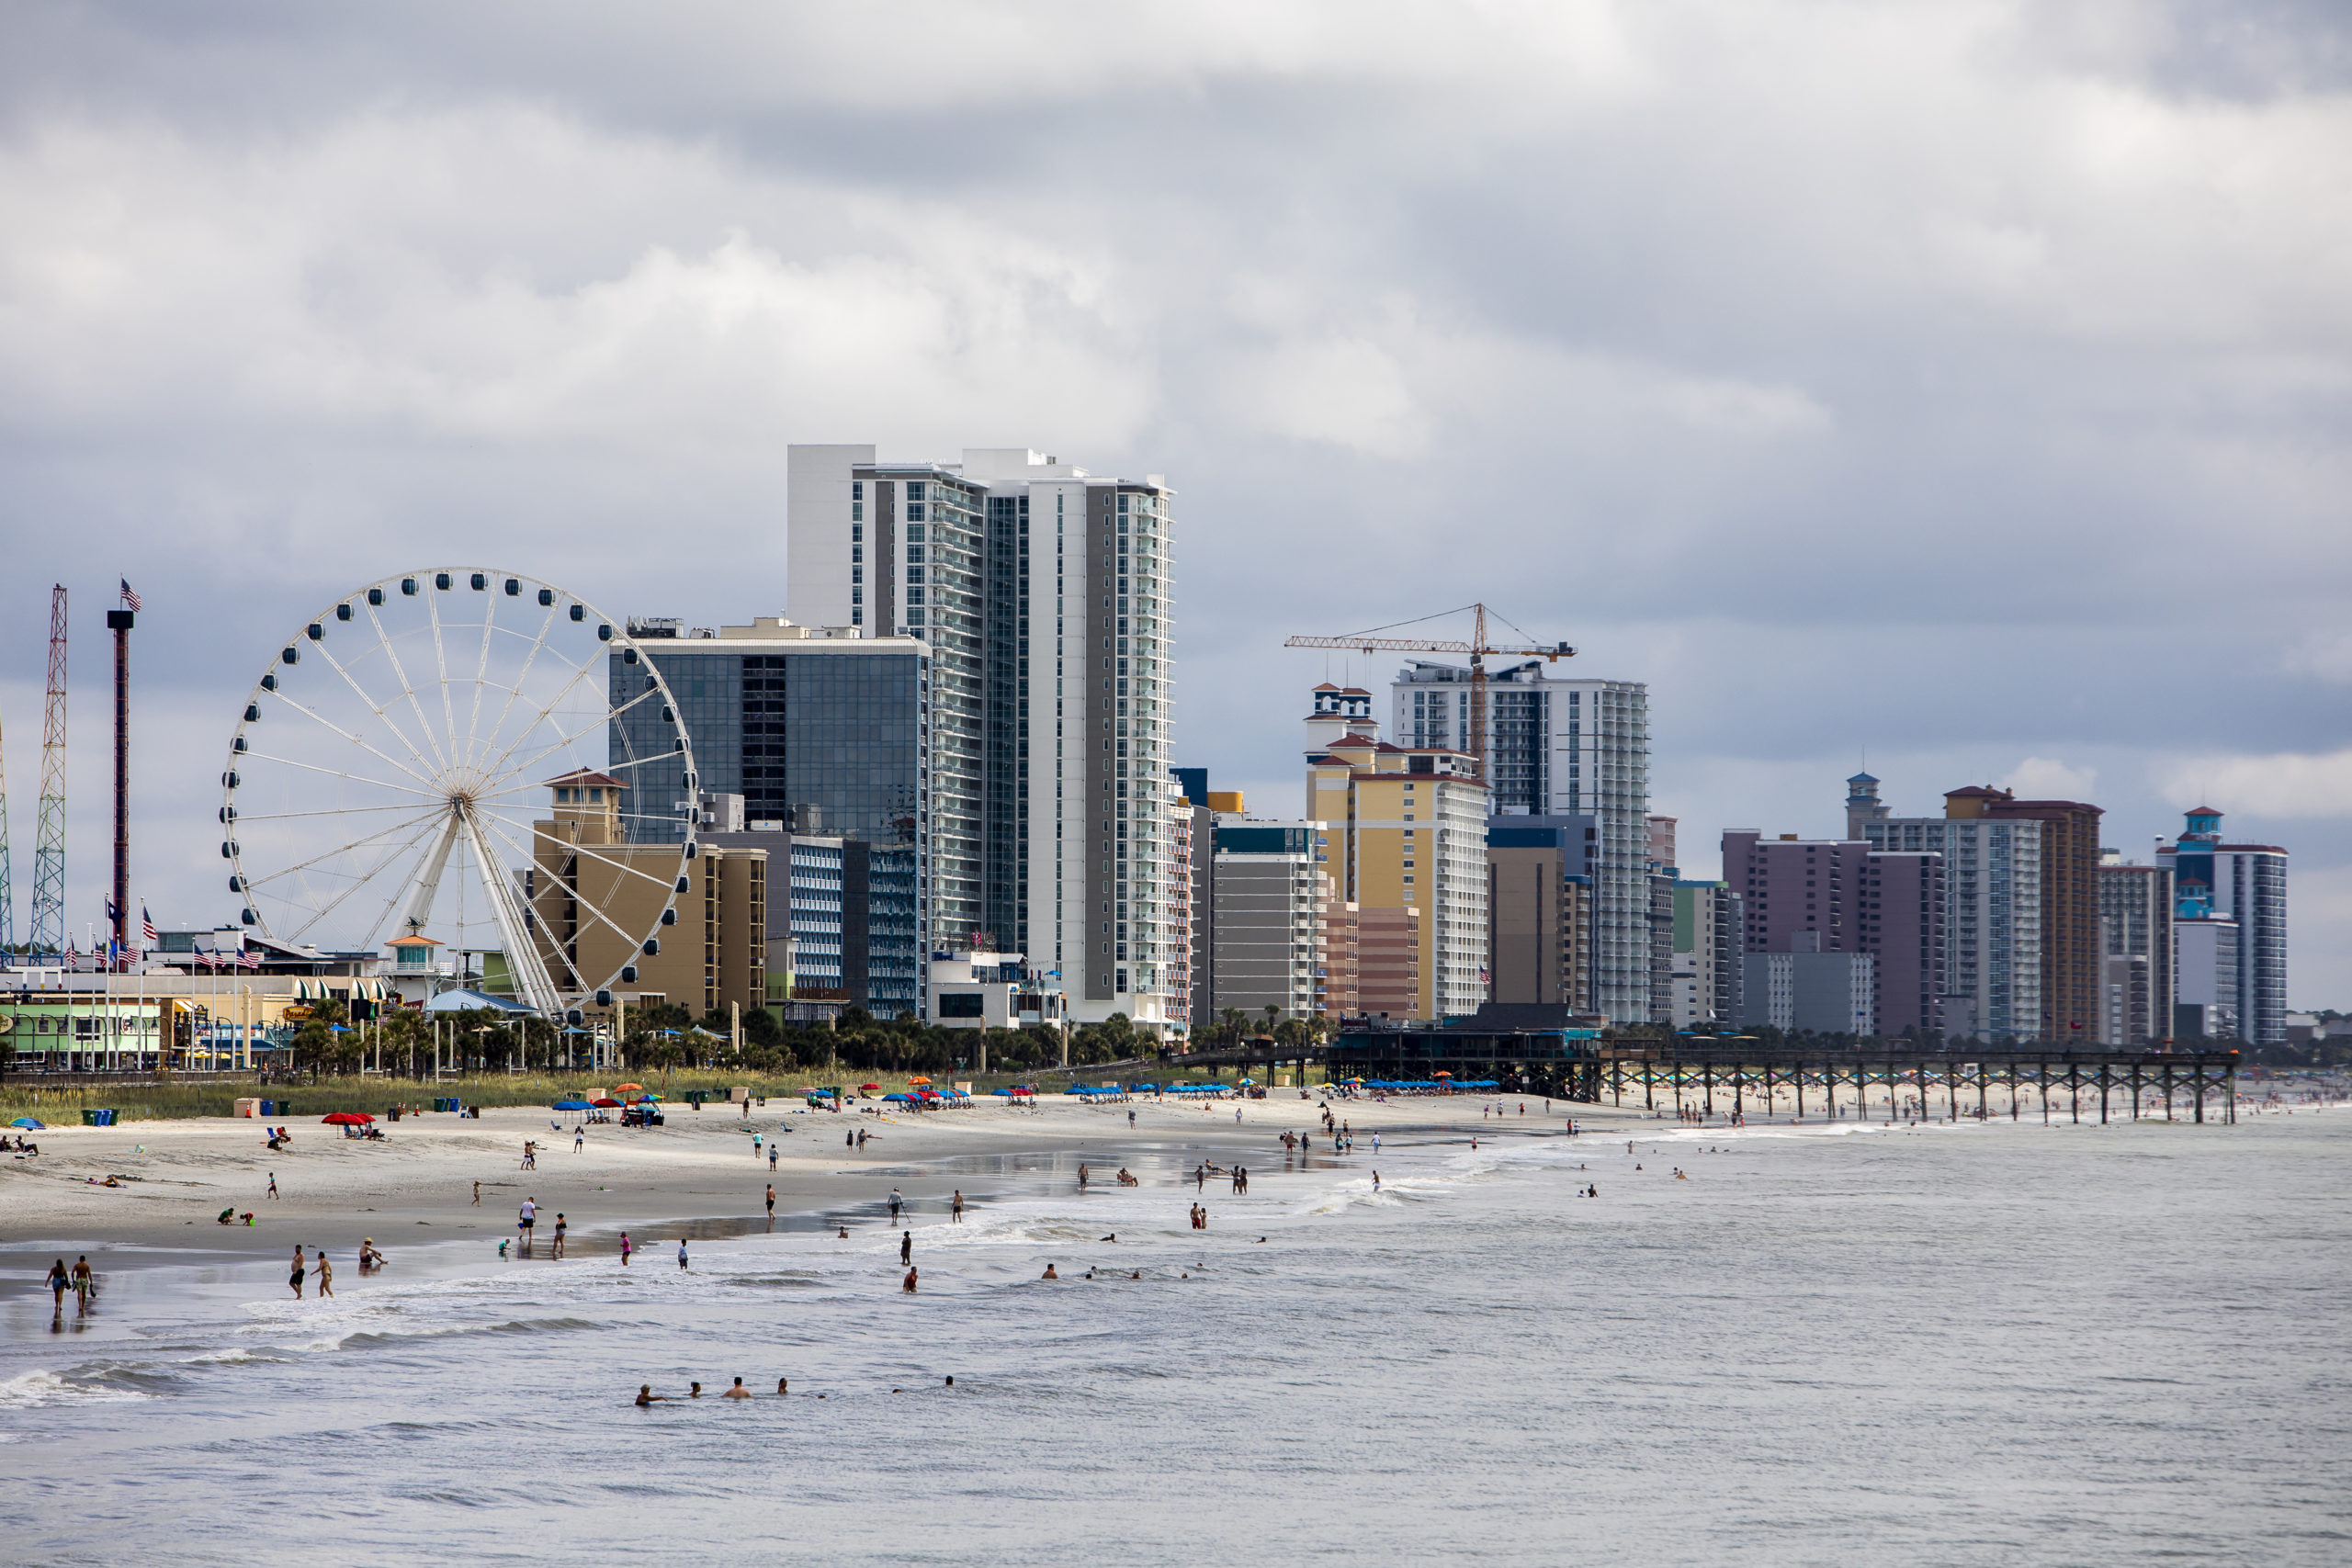 A landscape photo of the beach in Myrtle Beach, South Carolina. To the left of the coastline, there is a ferries wheel in the distance. To the right, tall buildings compose of the skyline. Beachgoers can be seen on the shore.